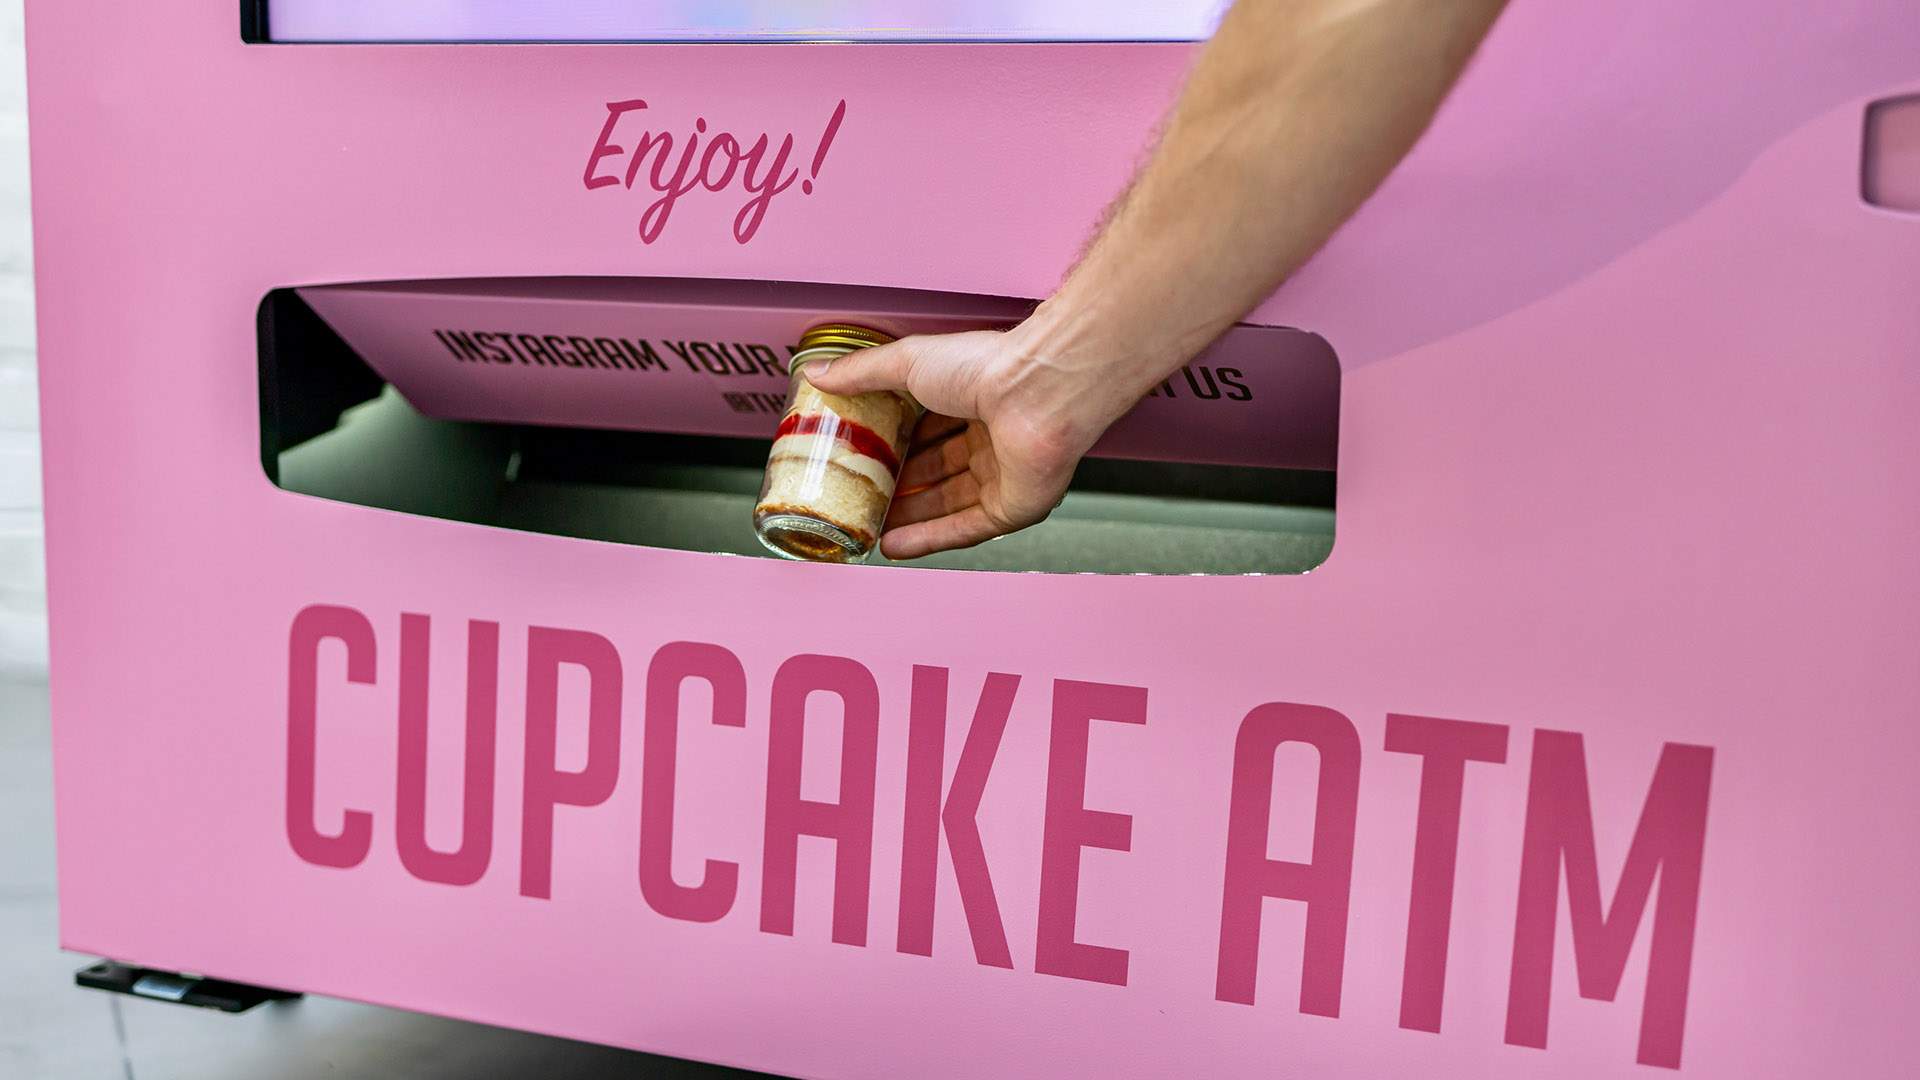 A Cupcake ATM Is Popping Up in Fortitude Valley This Month Thanks to The Mason Baker